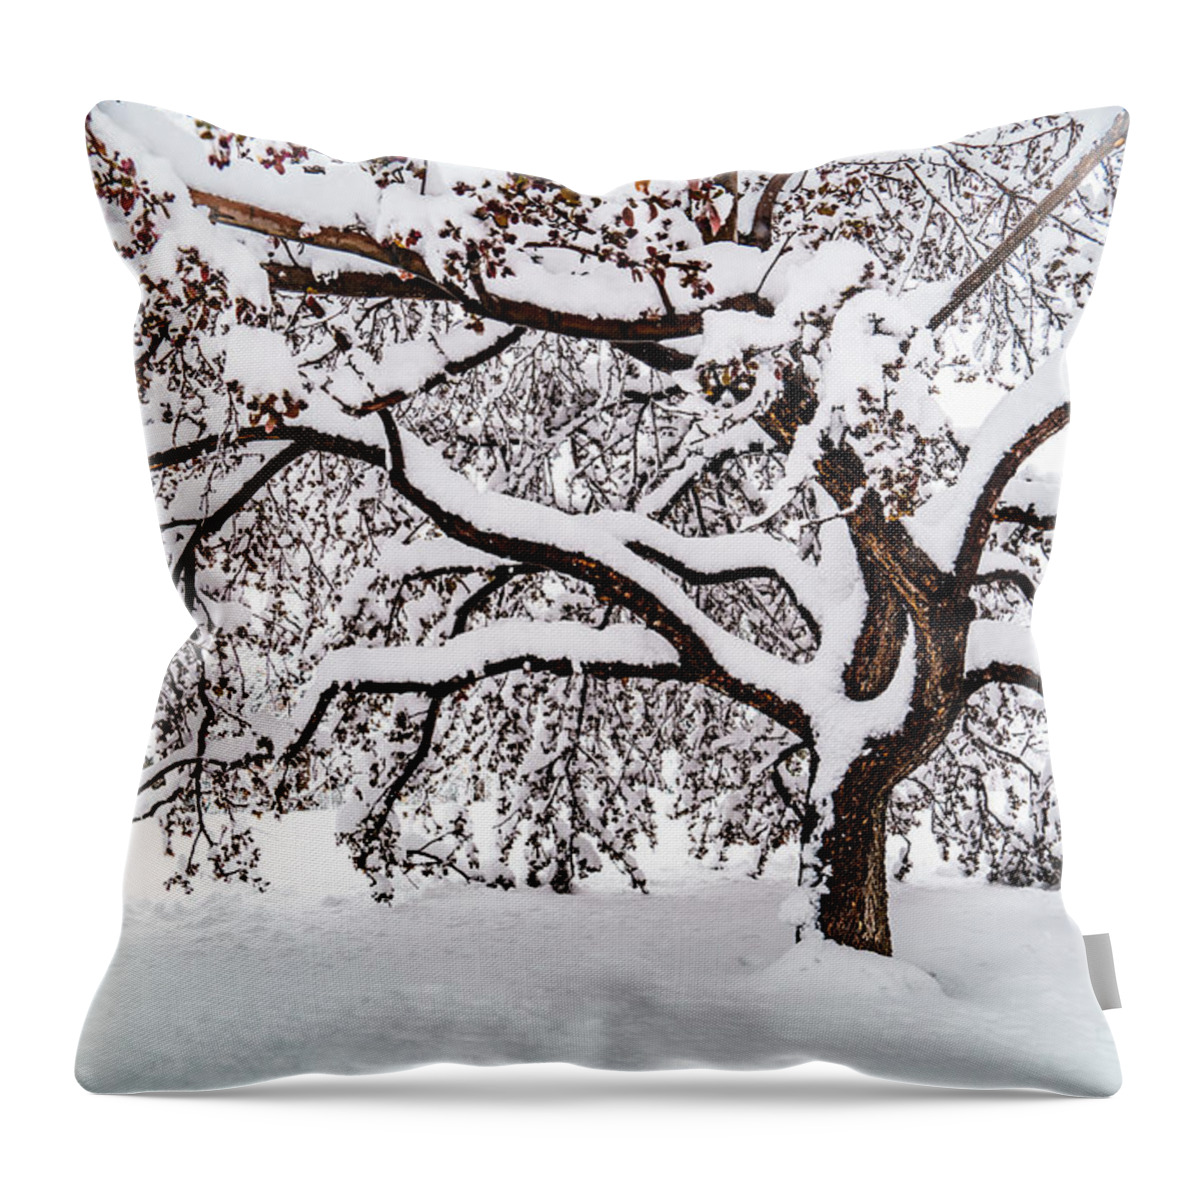 Tree Throw Pillow featuring the photograph My Favorite Tree in the Snow by Janis Knight